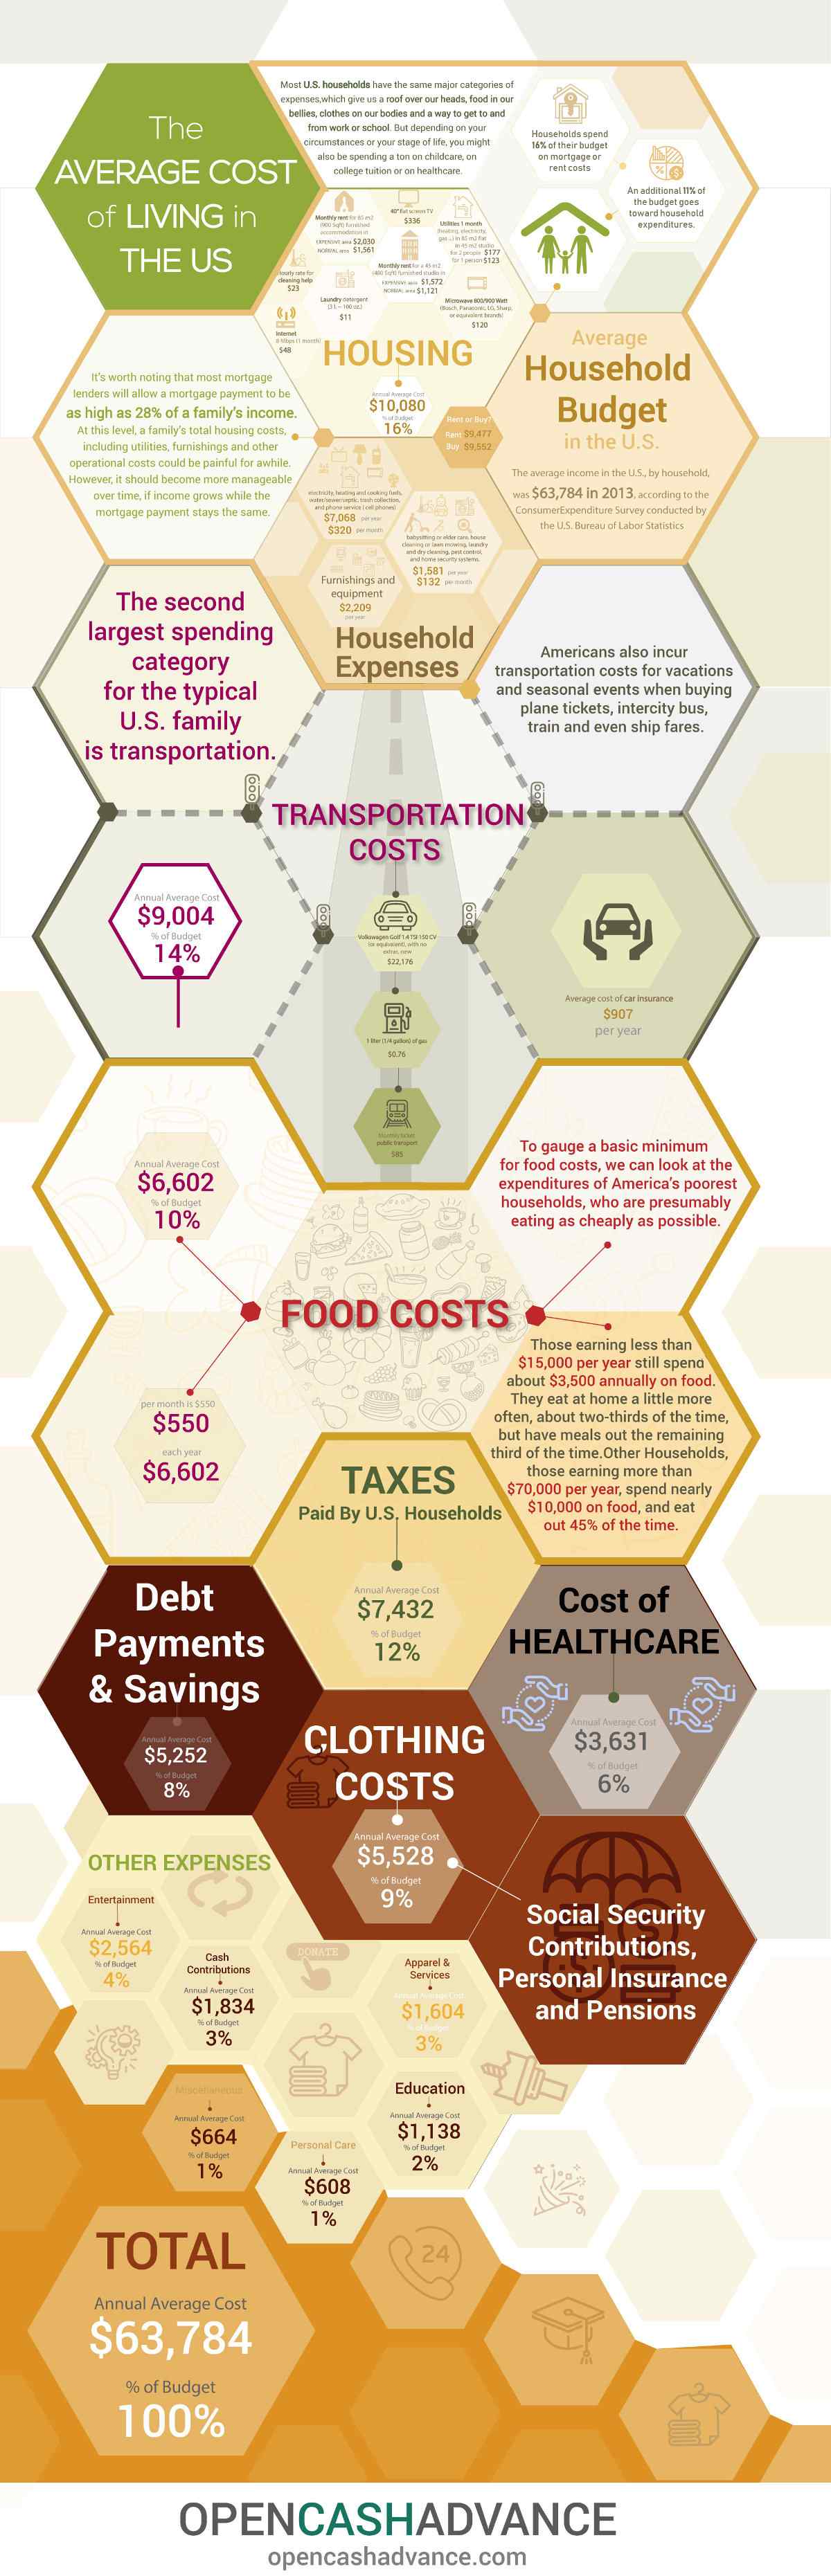 See our infographic on the average cost of living in the US.